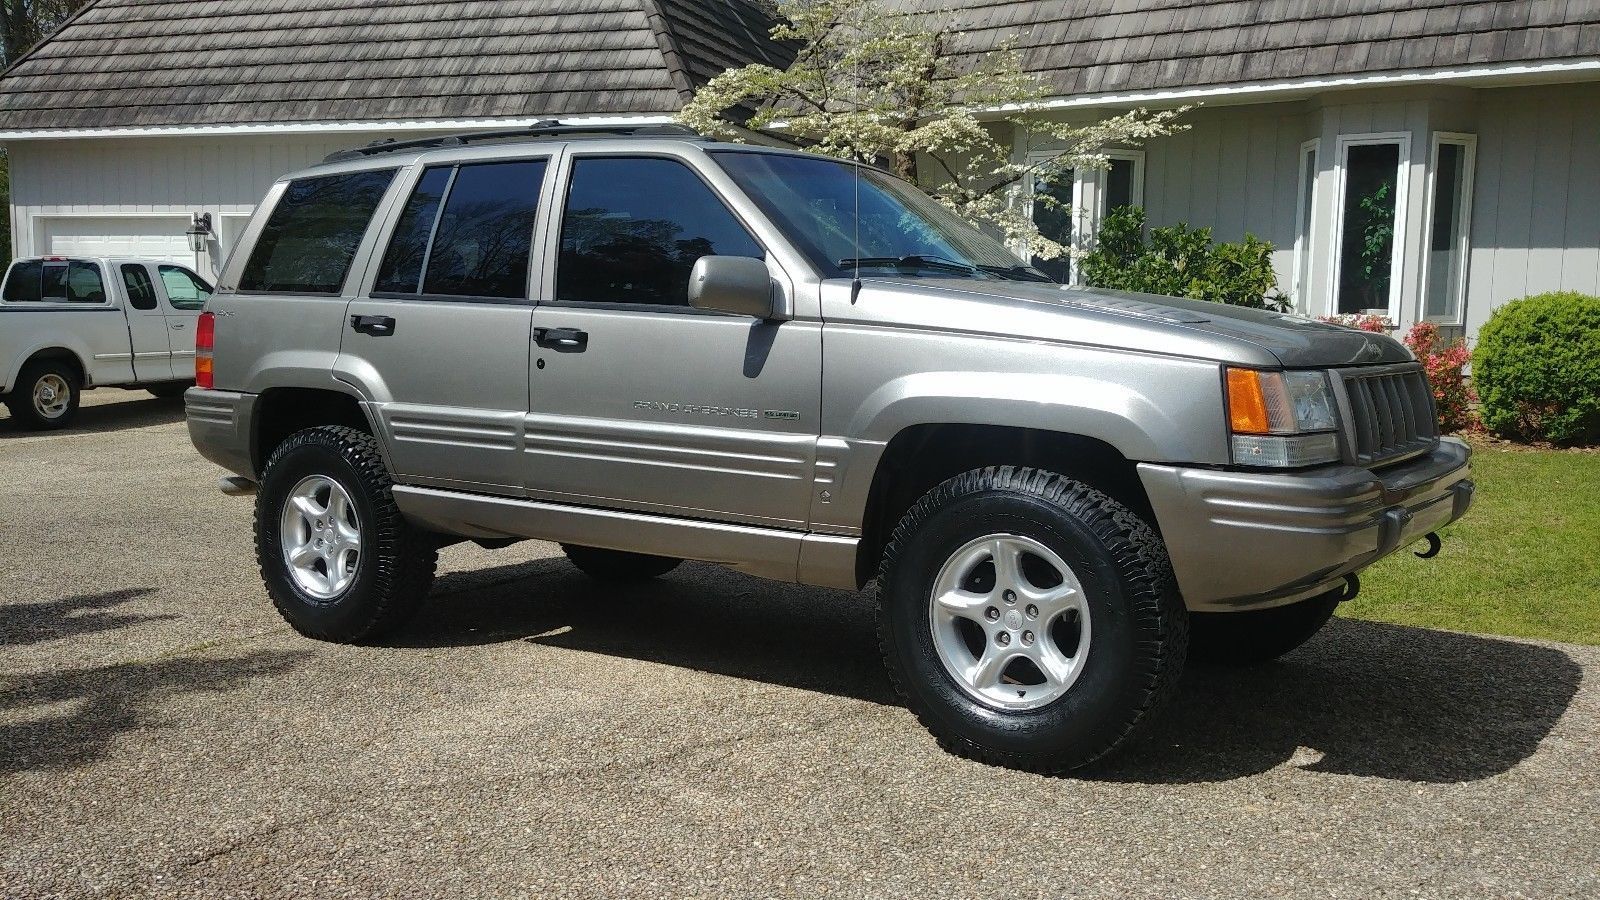 Silver 1998 Grand Cherokee 5.9L parked in front of a house